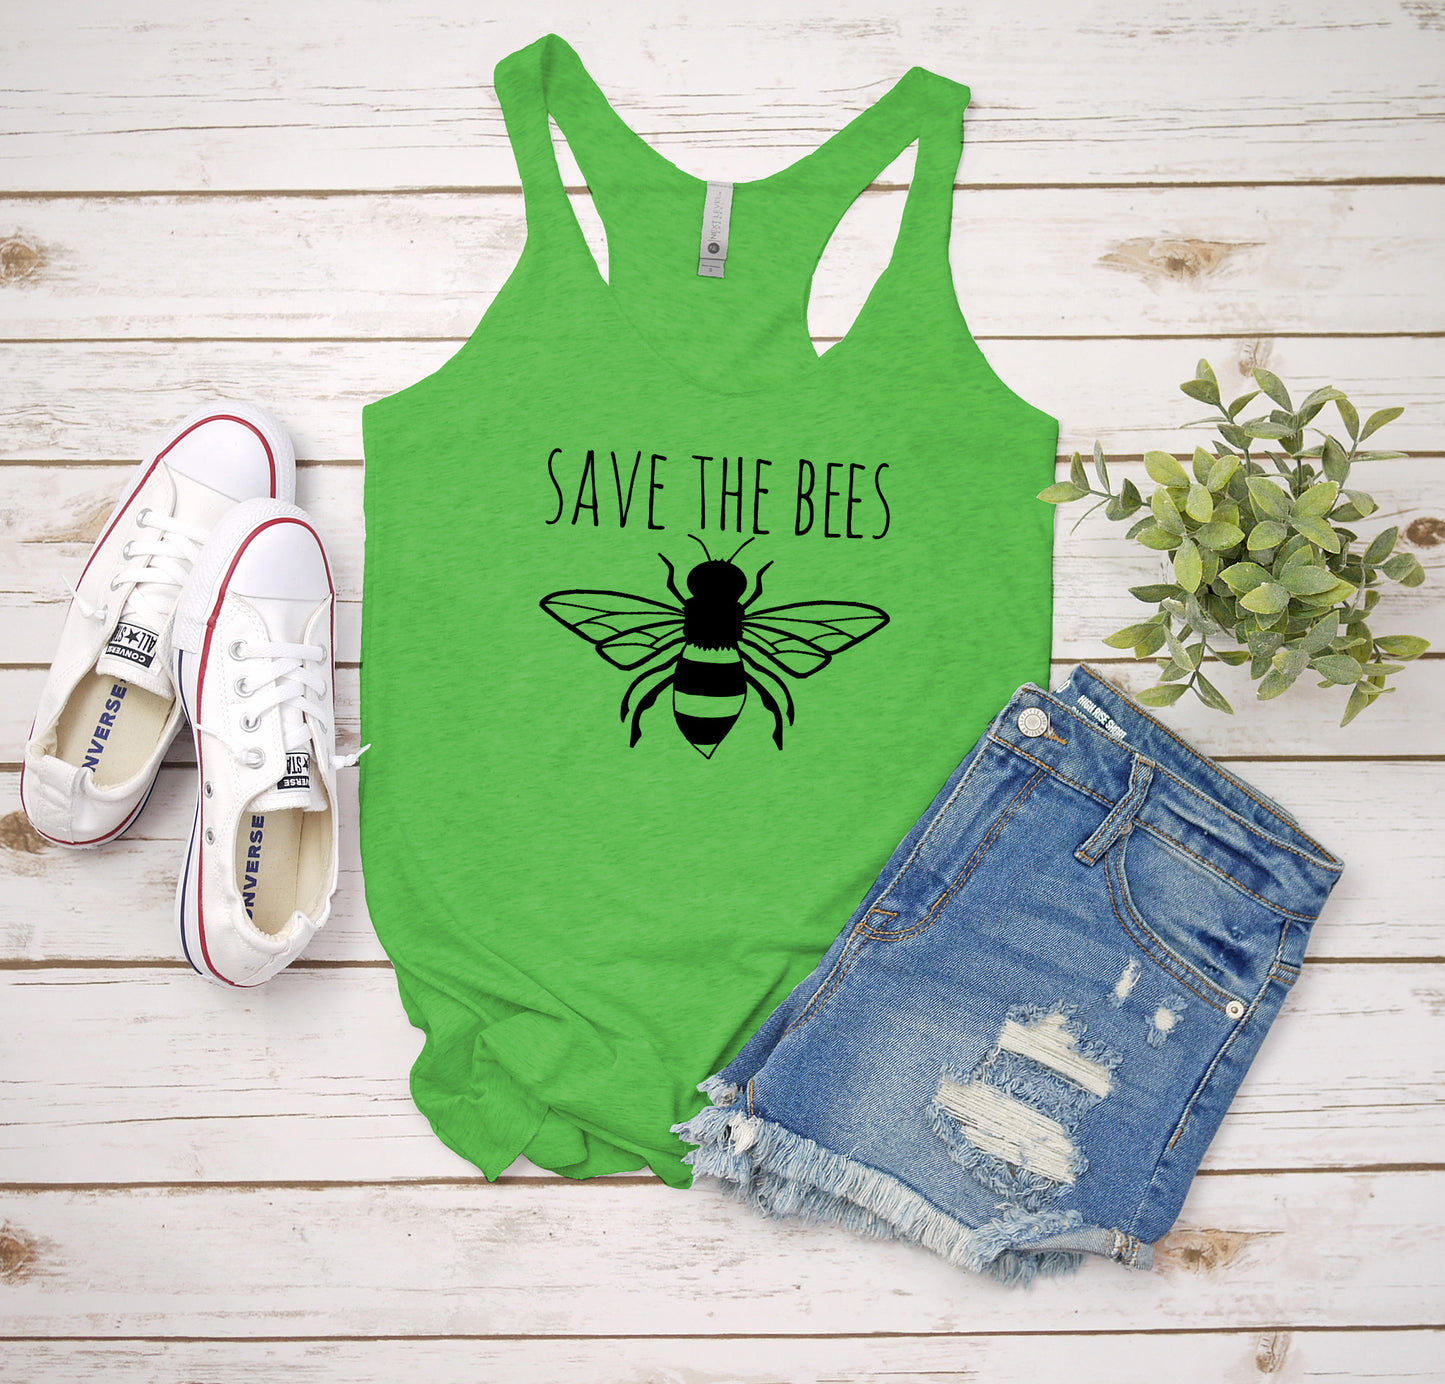 Save The Bees - Women's Tank - Heather Gray, Tahiti, or Envy